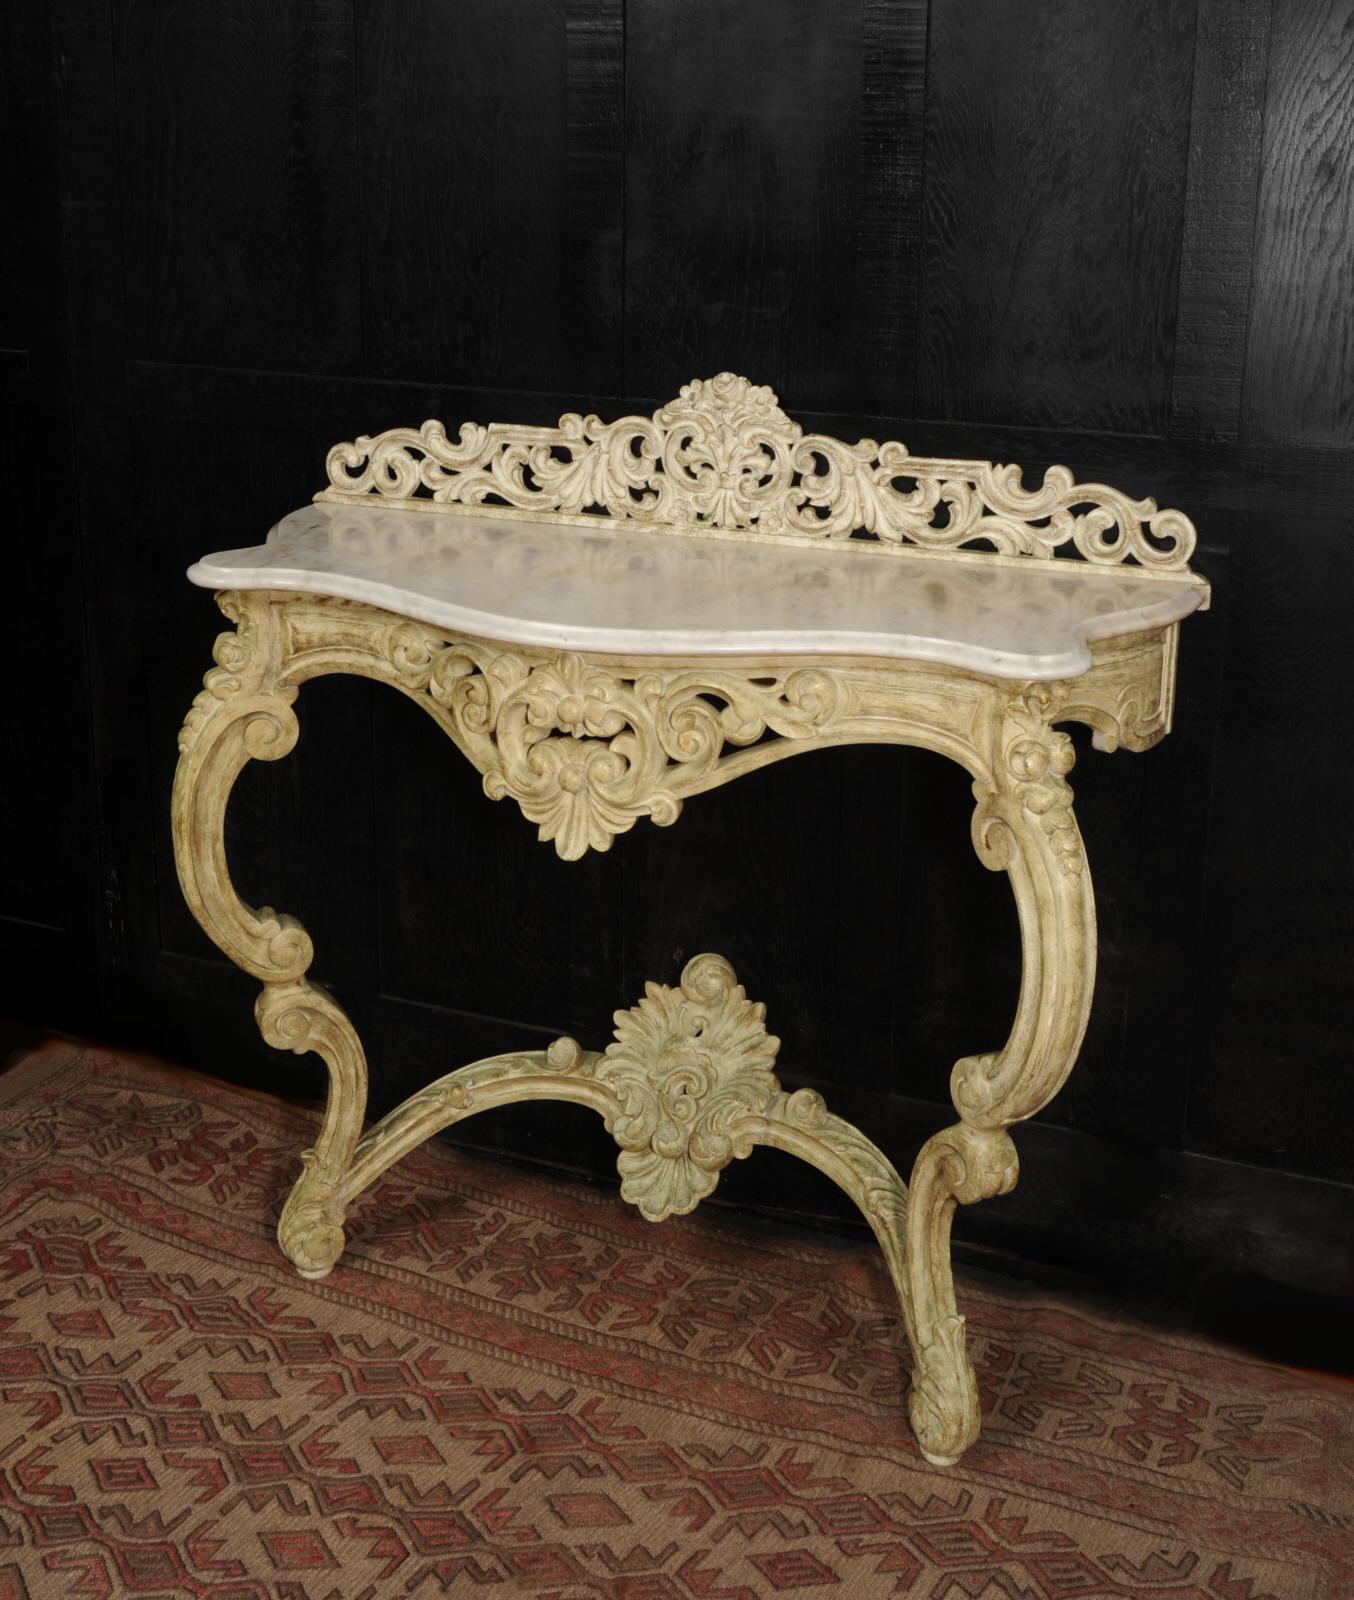 A beautiful carved and painted late Victorian Rococo console table with a Carrara marble top. It is beautifully carved in a hard wood, most likely mahogany, with bold scrolls and acanthus, and an arched stretcher with a flamboyant shell motif. It